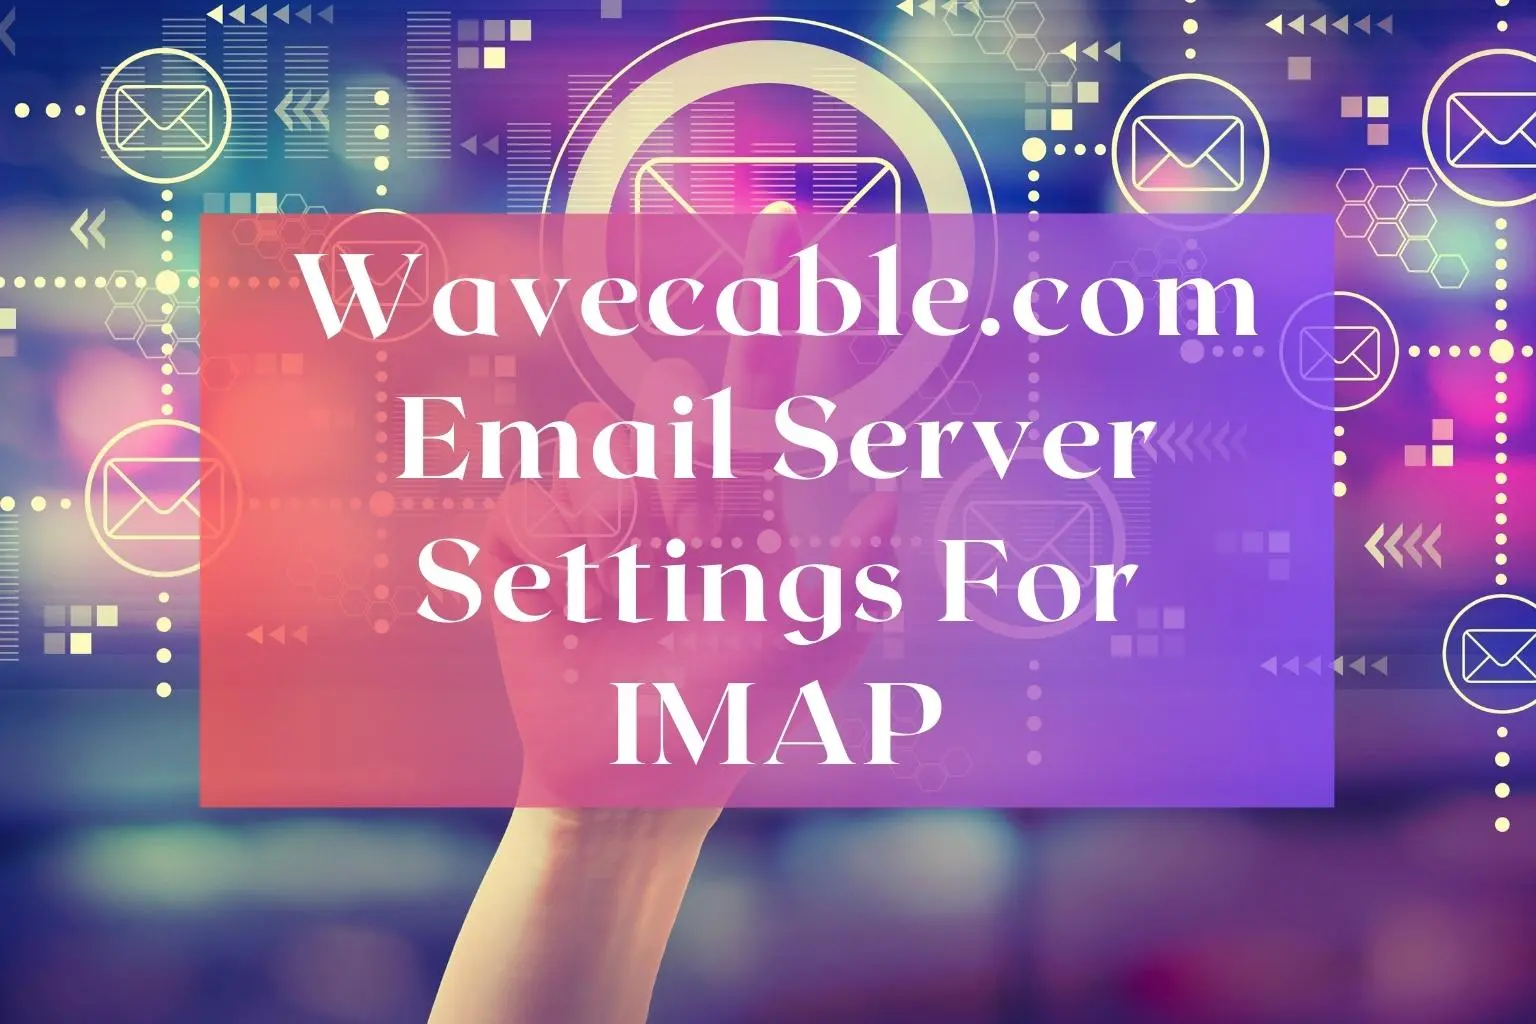 Wavecable.com Email Server Settings For imap